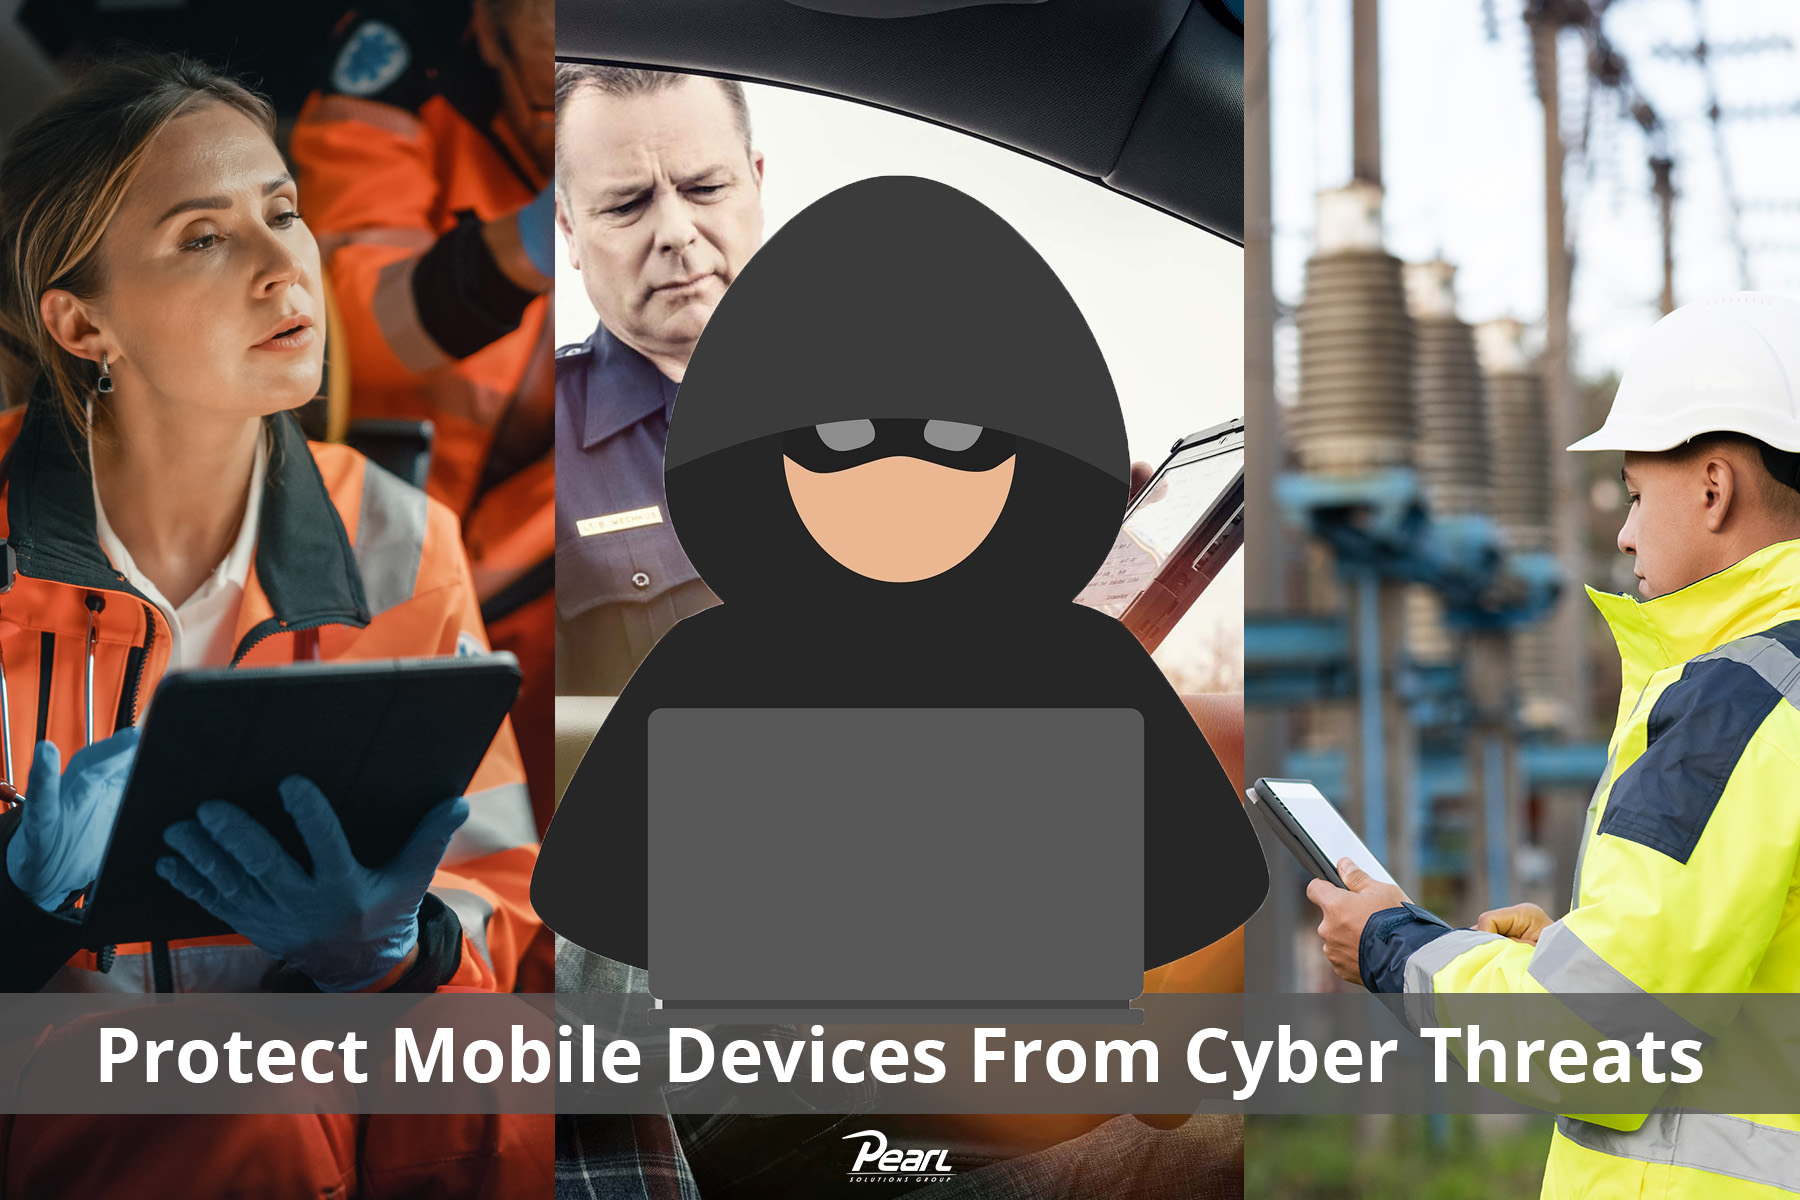 Protect Mobile Devices from Cyber Threats